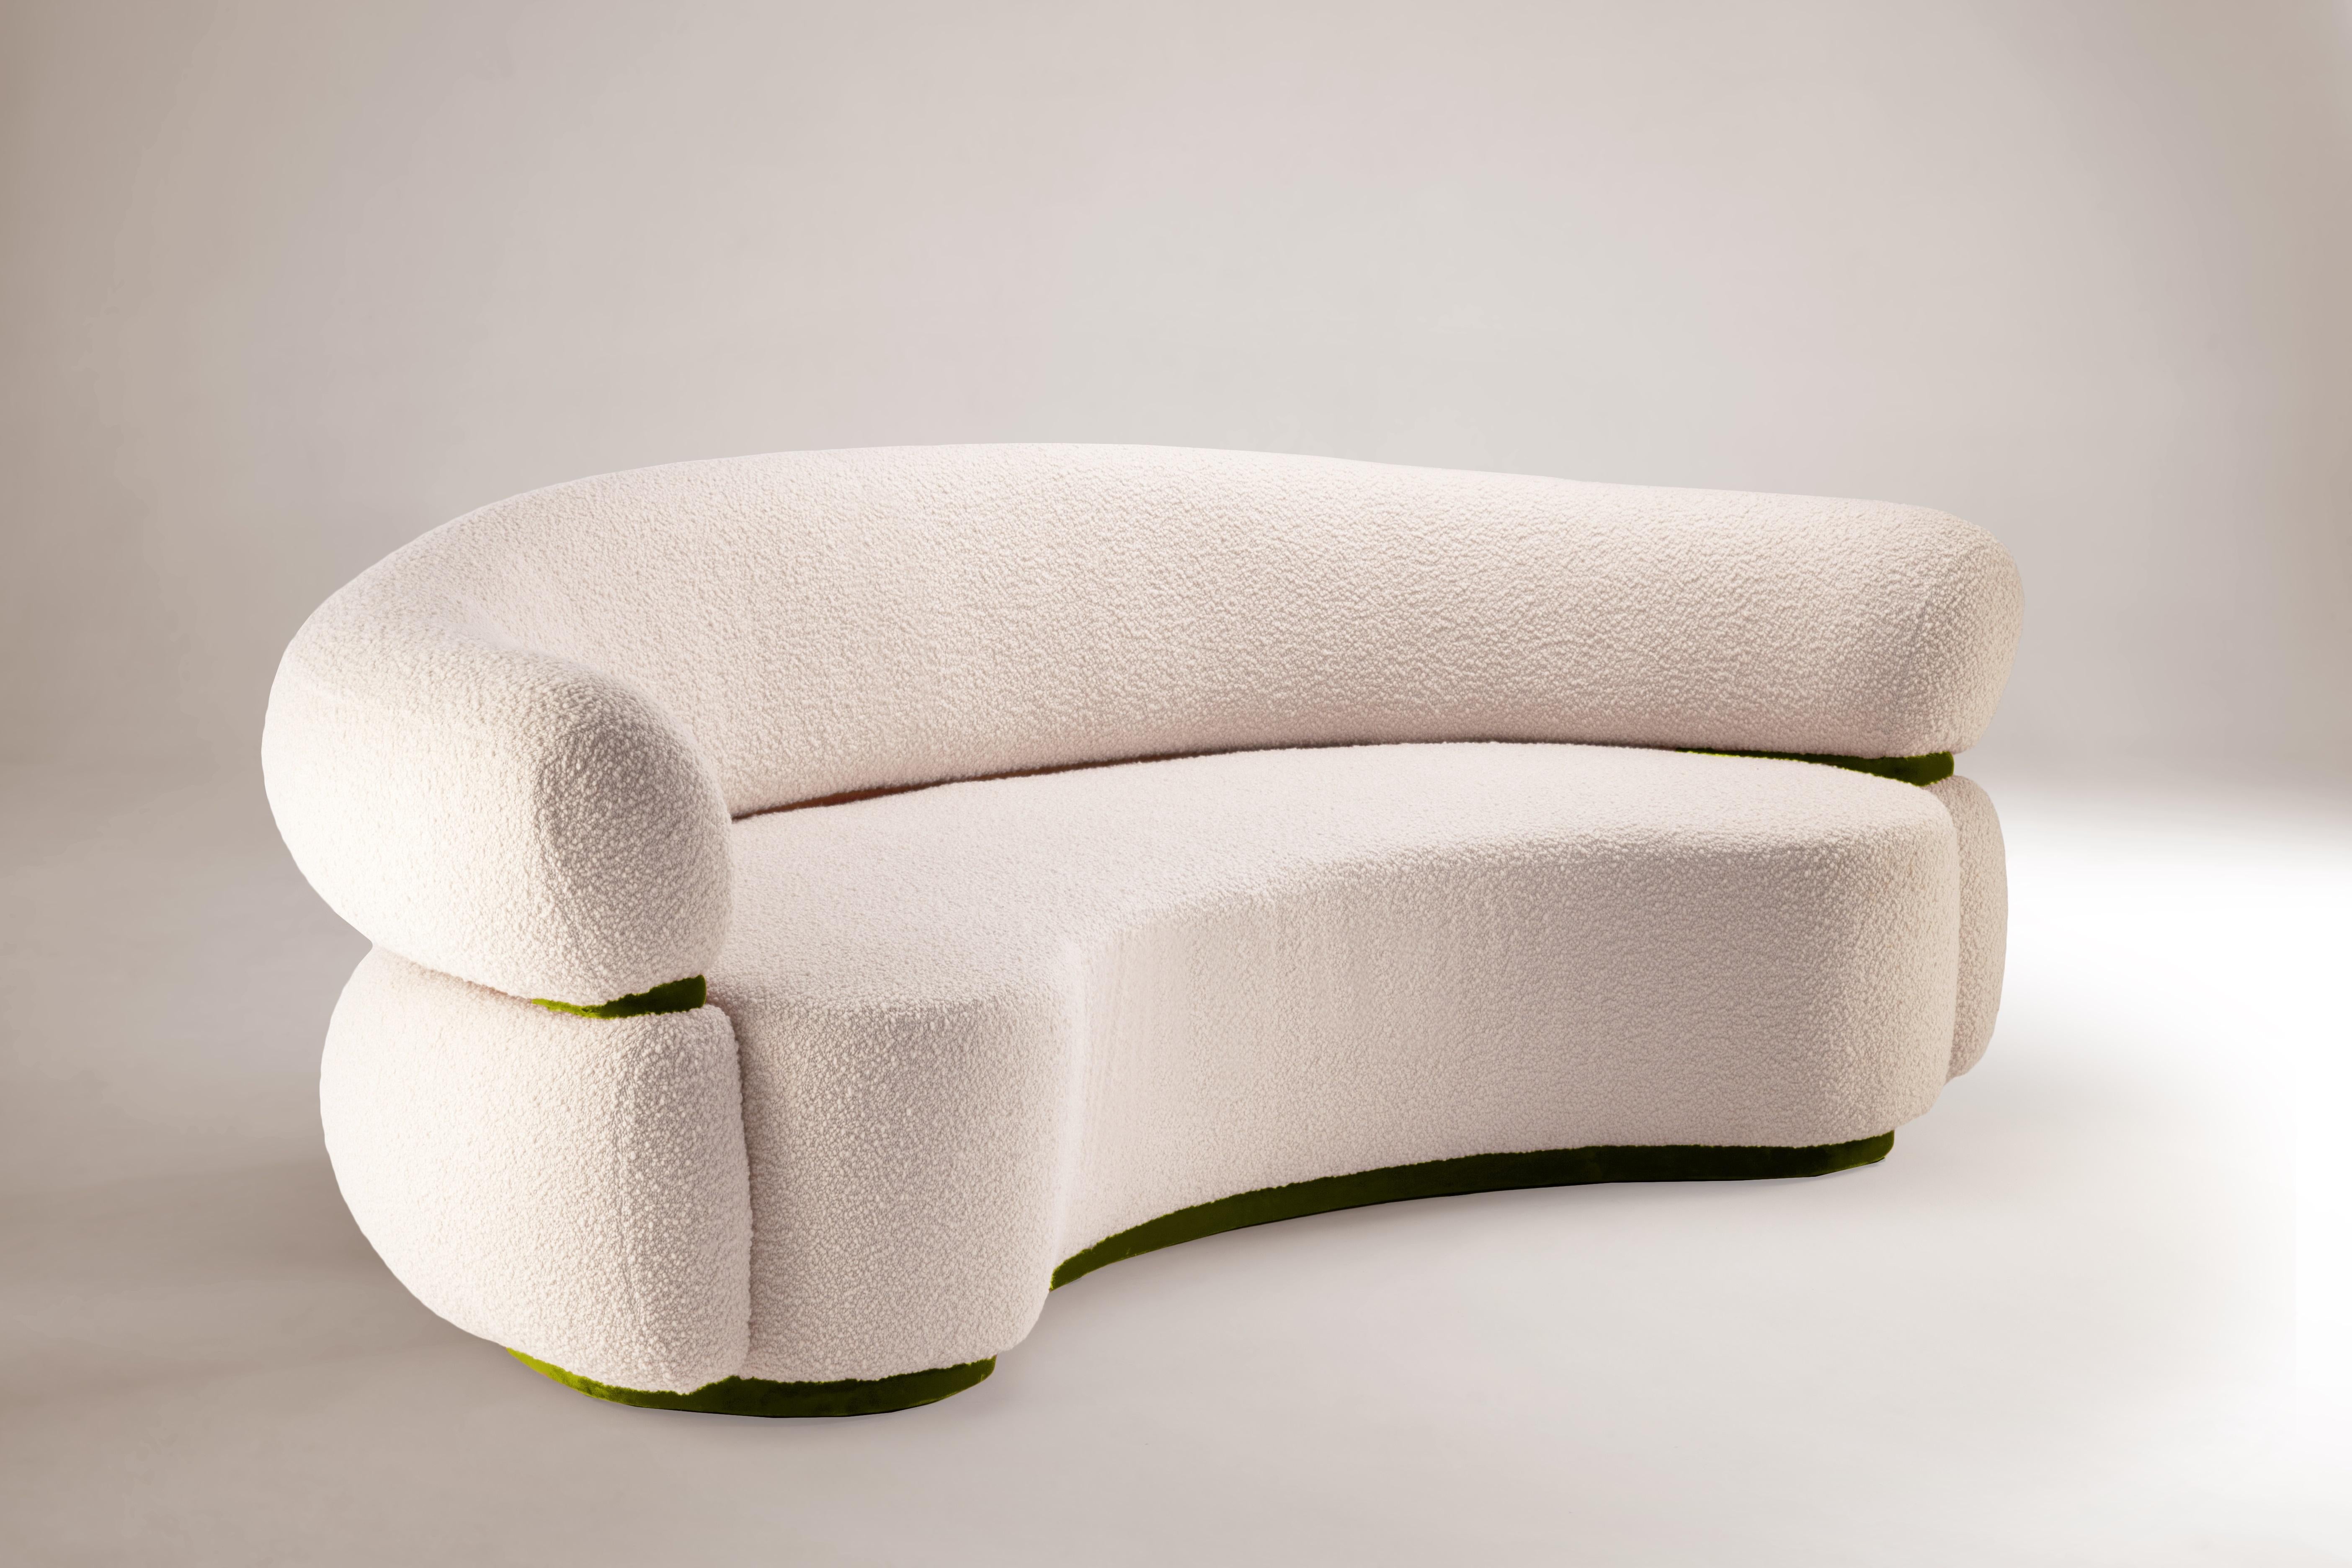 Like a warm embrace, Malibu Round Sofa welcomes you to stay within and relax. An elevated homage to the golden age of midcentury design and organic architecture, it radiates through its unusual proportions and strong curves with softness and Fine